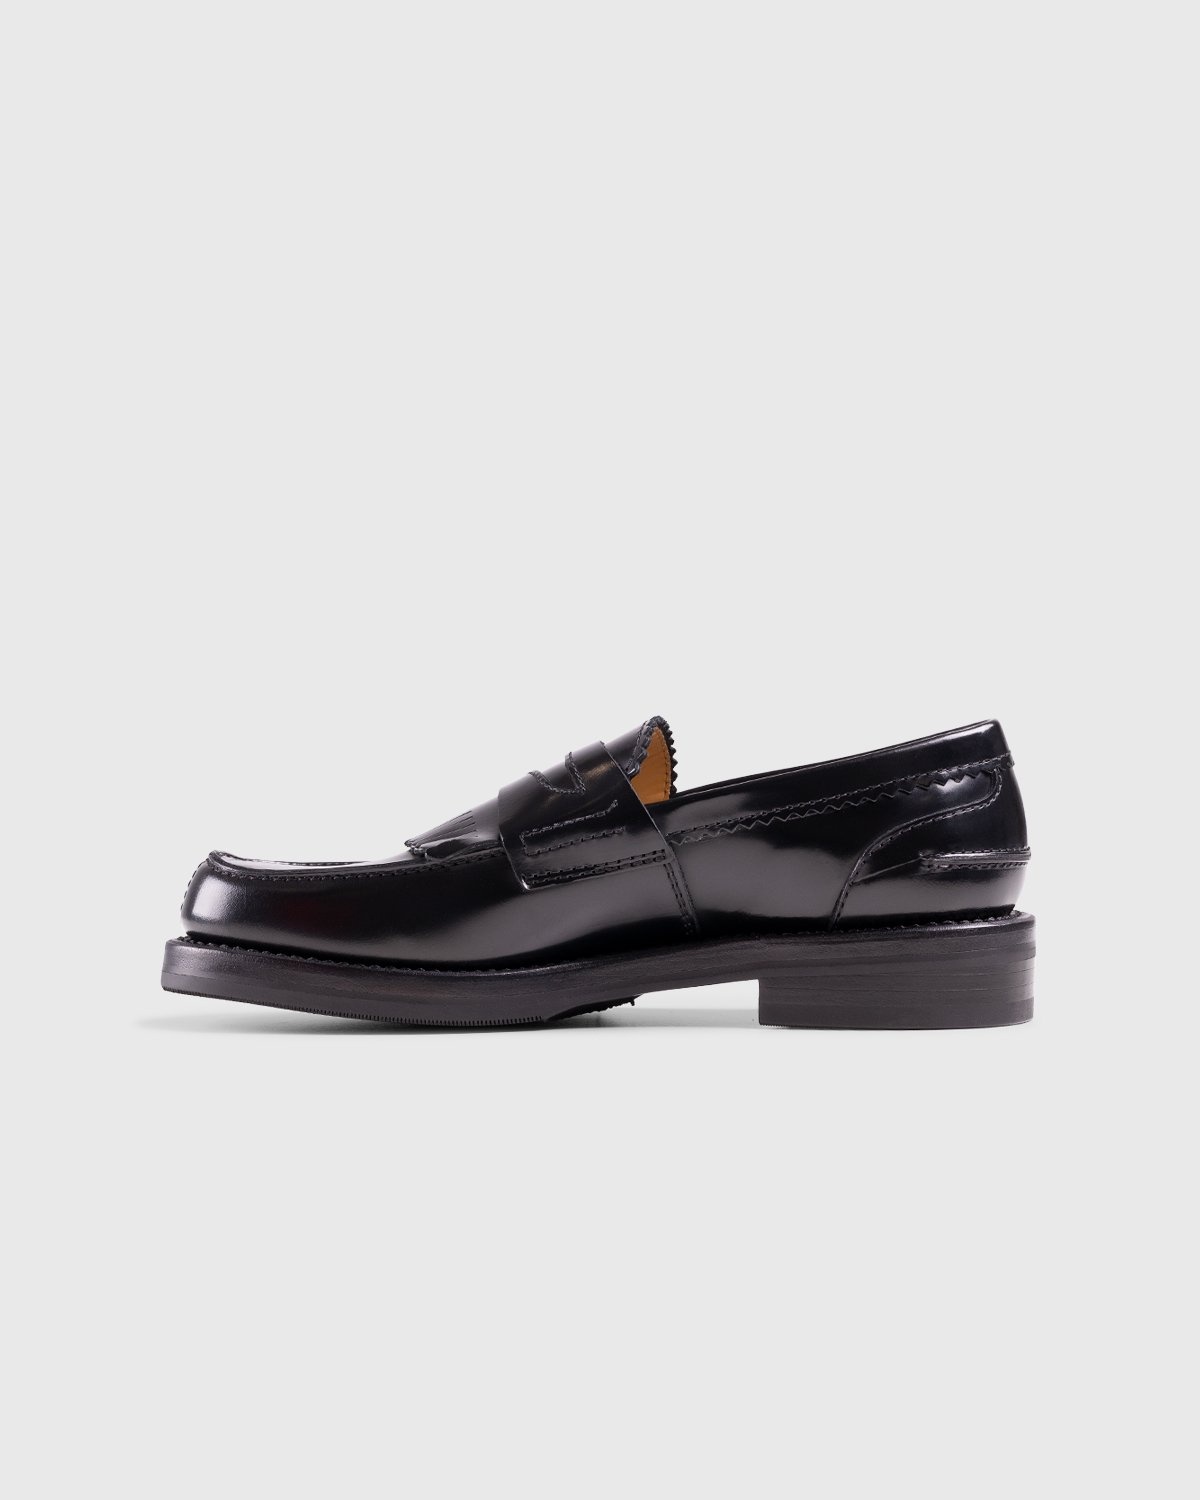 Our Legacy – Penny Loafer Black Leather - Shoes - Black - Image 2